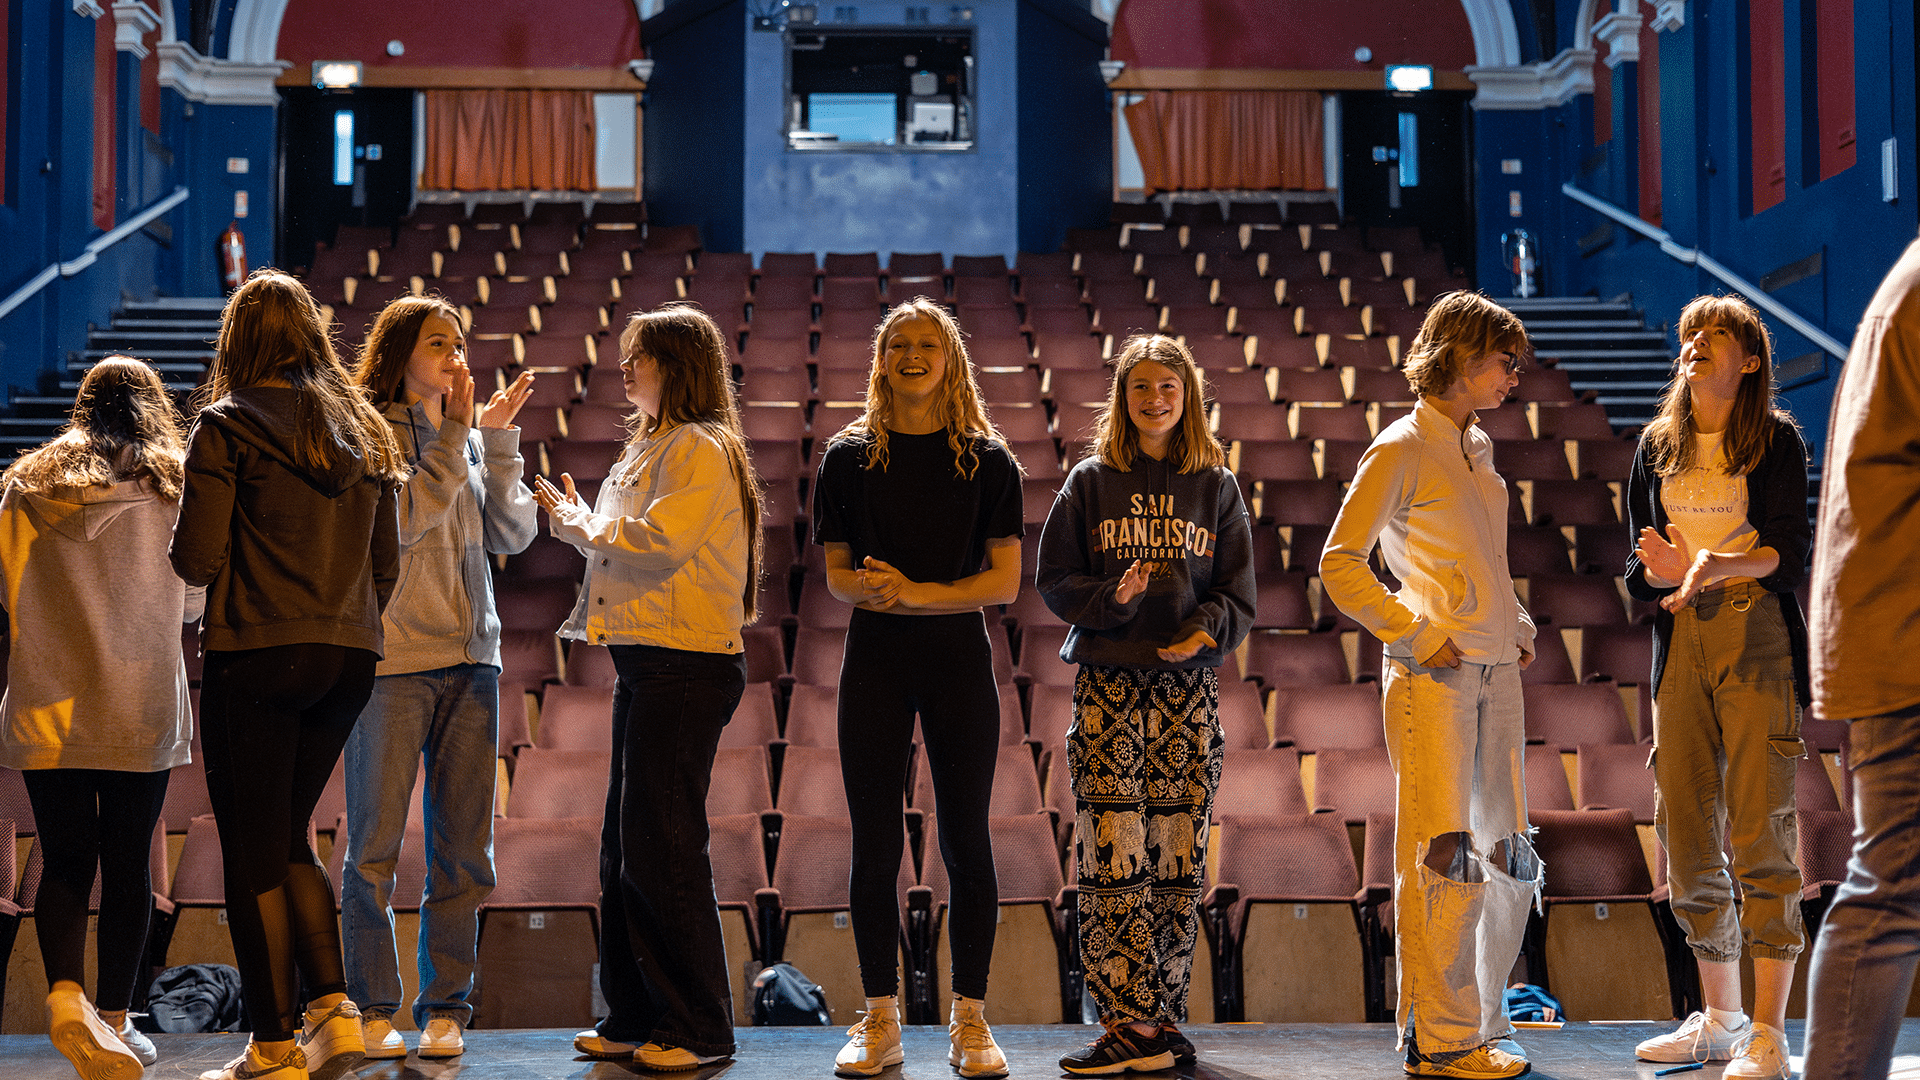 Barnfield Theatre auditorium. A mixed group of young people talk to each other while standing on the Barnfield Theatre auditorium stage. They have their backs turned to the auditorium seats, which are empty.